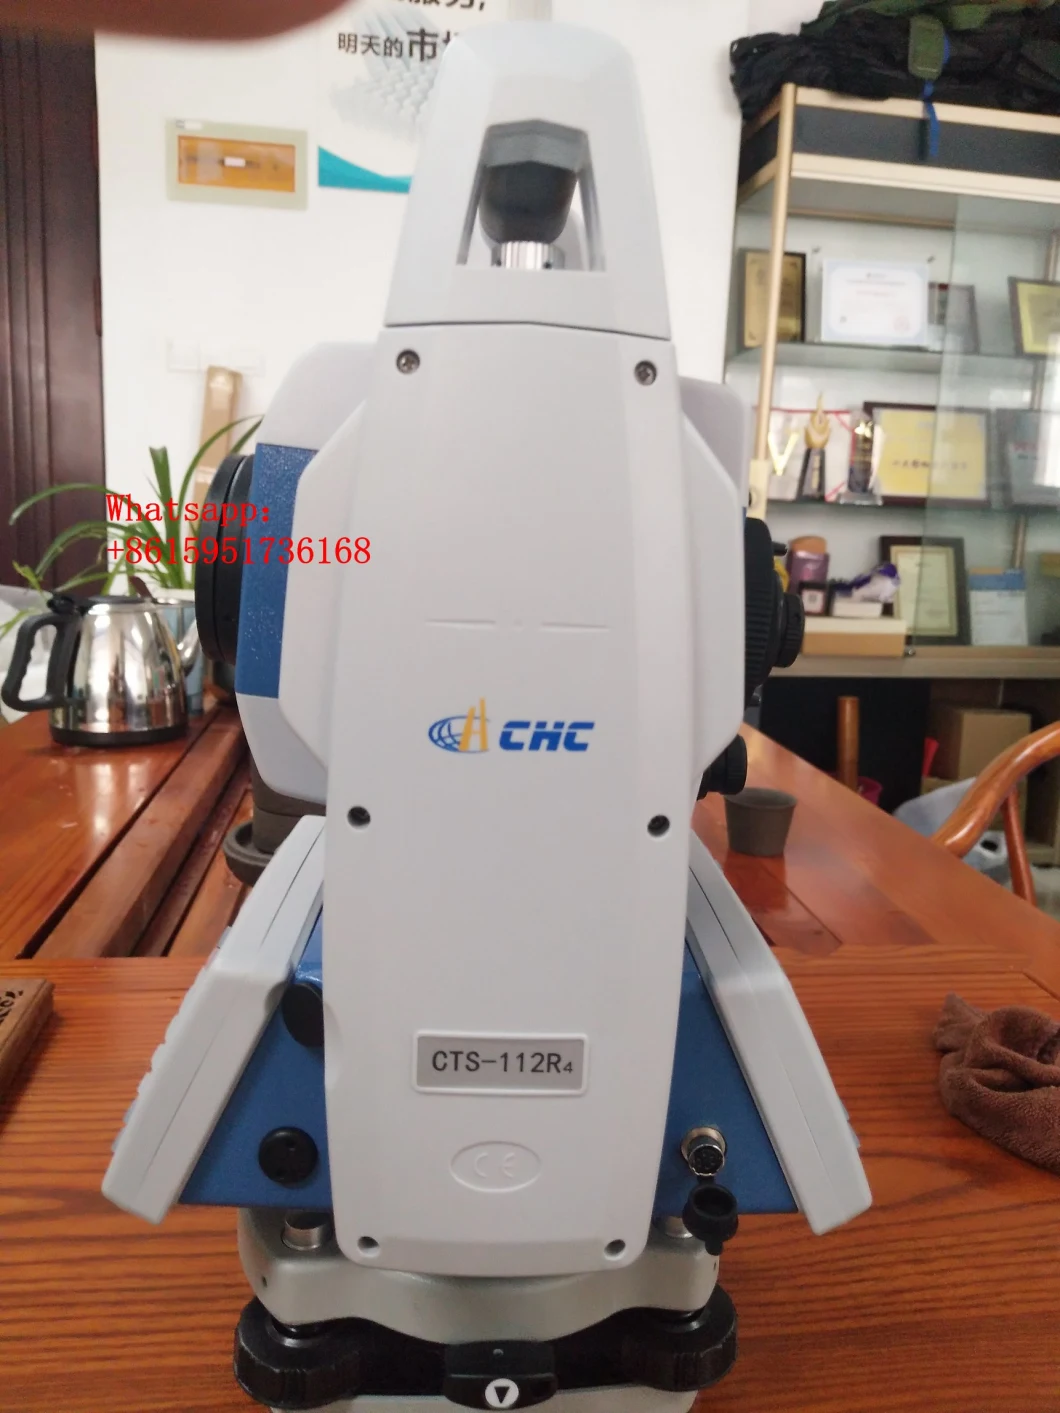 Chc Cts-112r4 Non Prism 400m Total Station